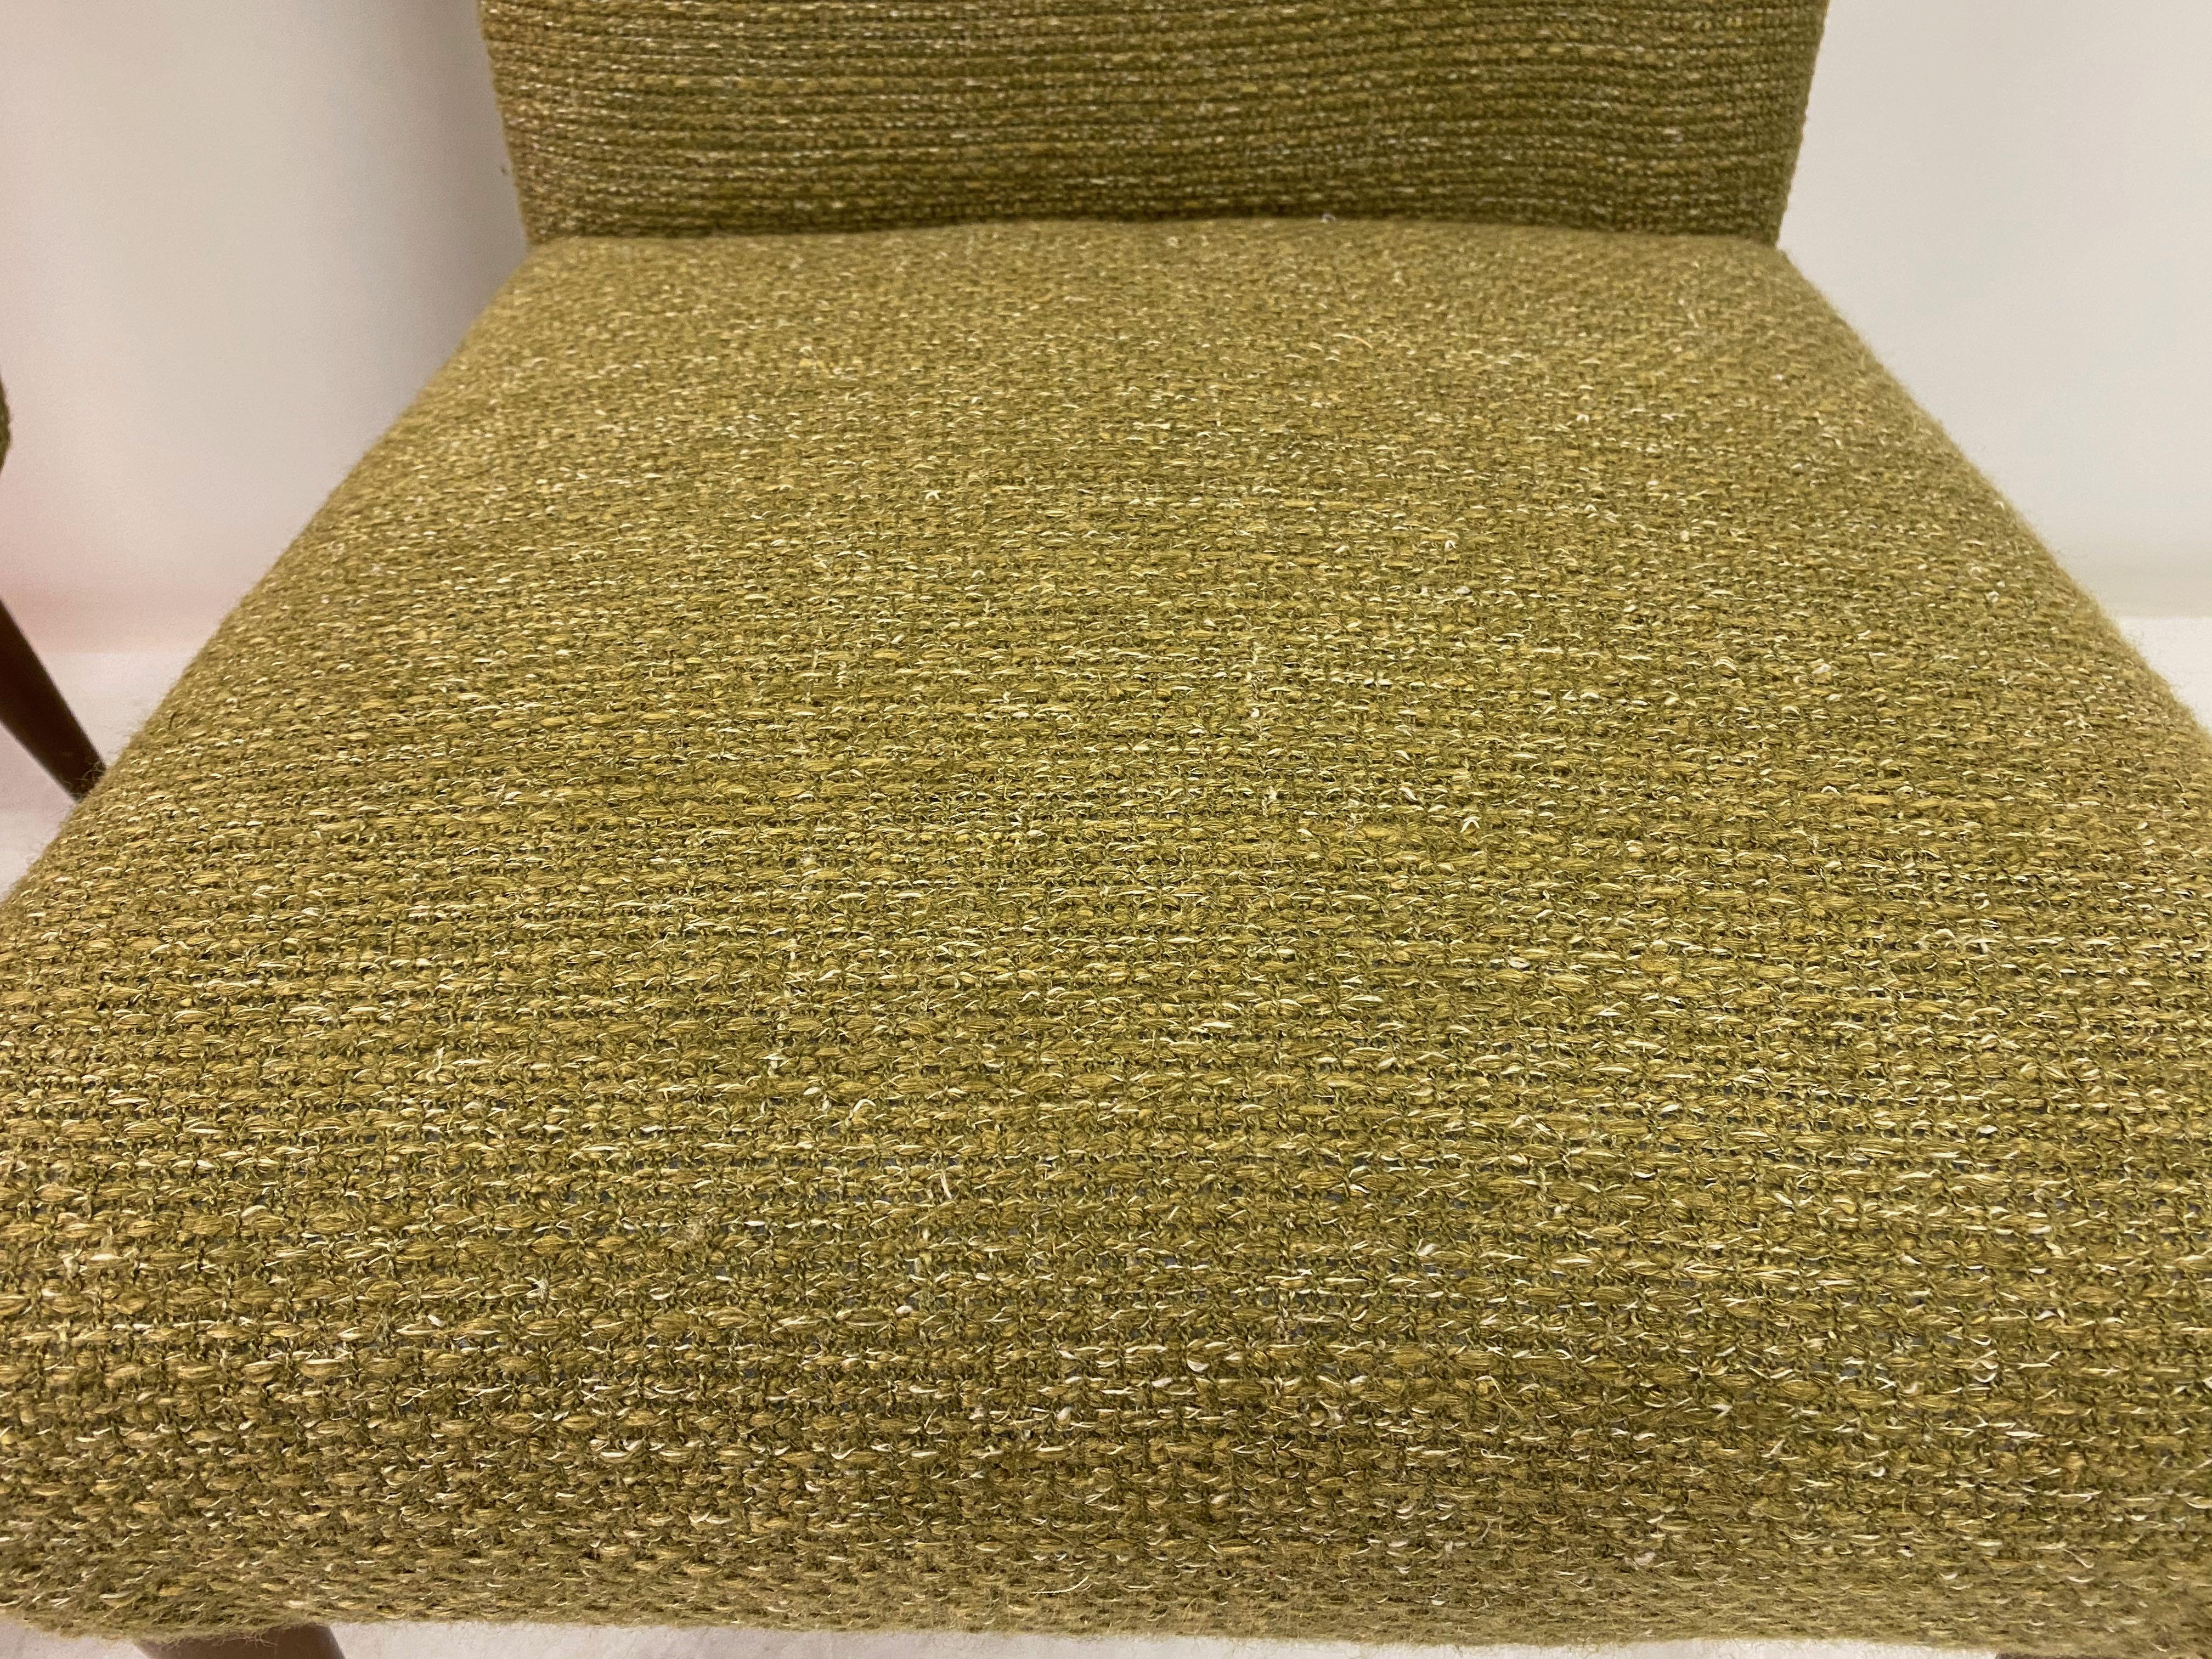 20th Century Midcentury Pair of Italian 1950s Slipper Chairs in Green Wool Linen Blend